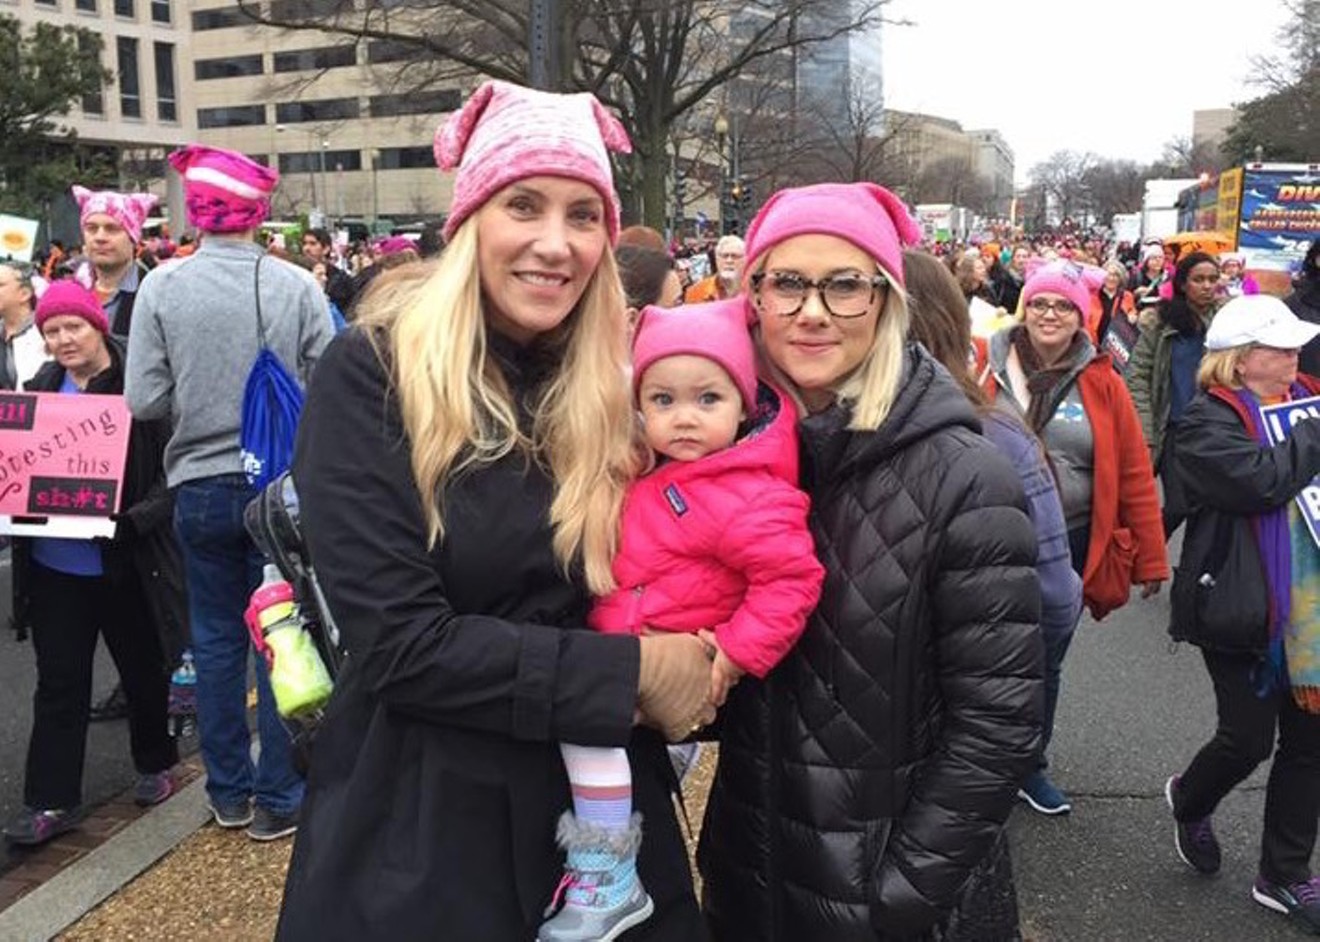 Protesters sport pussyhats made by KRELwear at the Women's March in Washington, D.C.